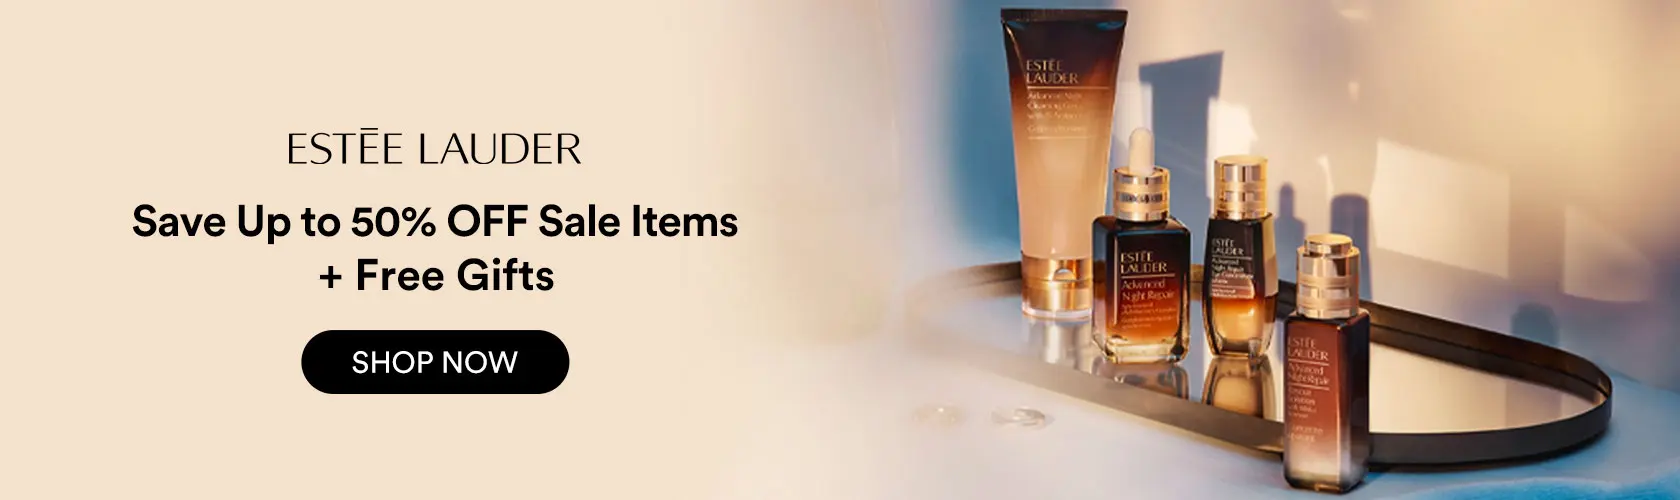 Estee Lauder: Save Up to 50% OFF Sale Items + Free Gifts